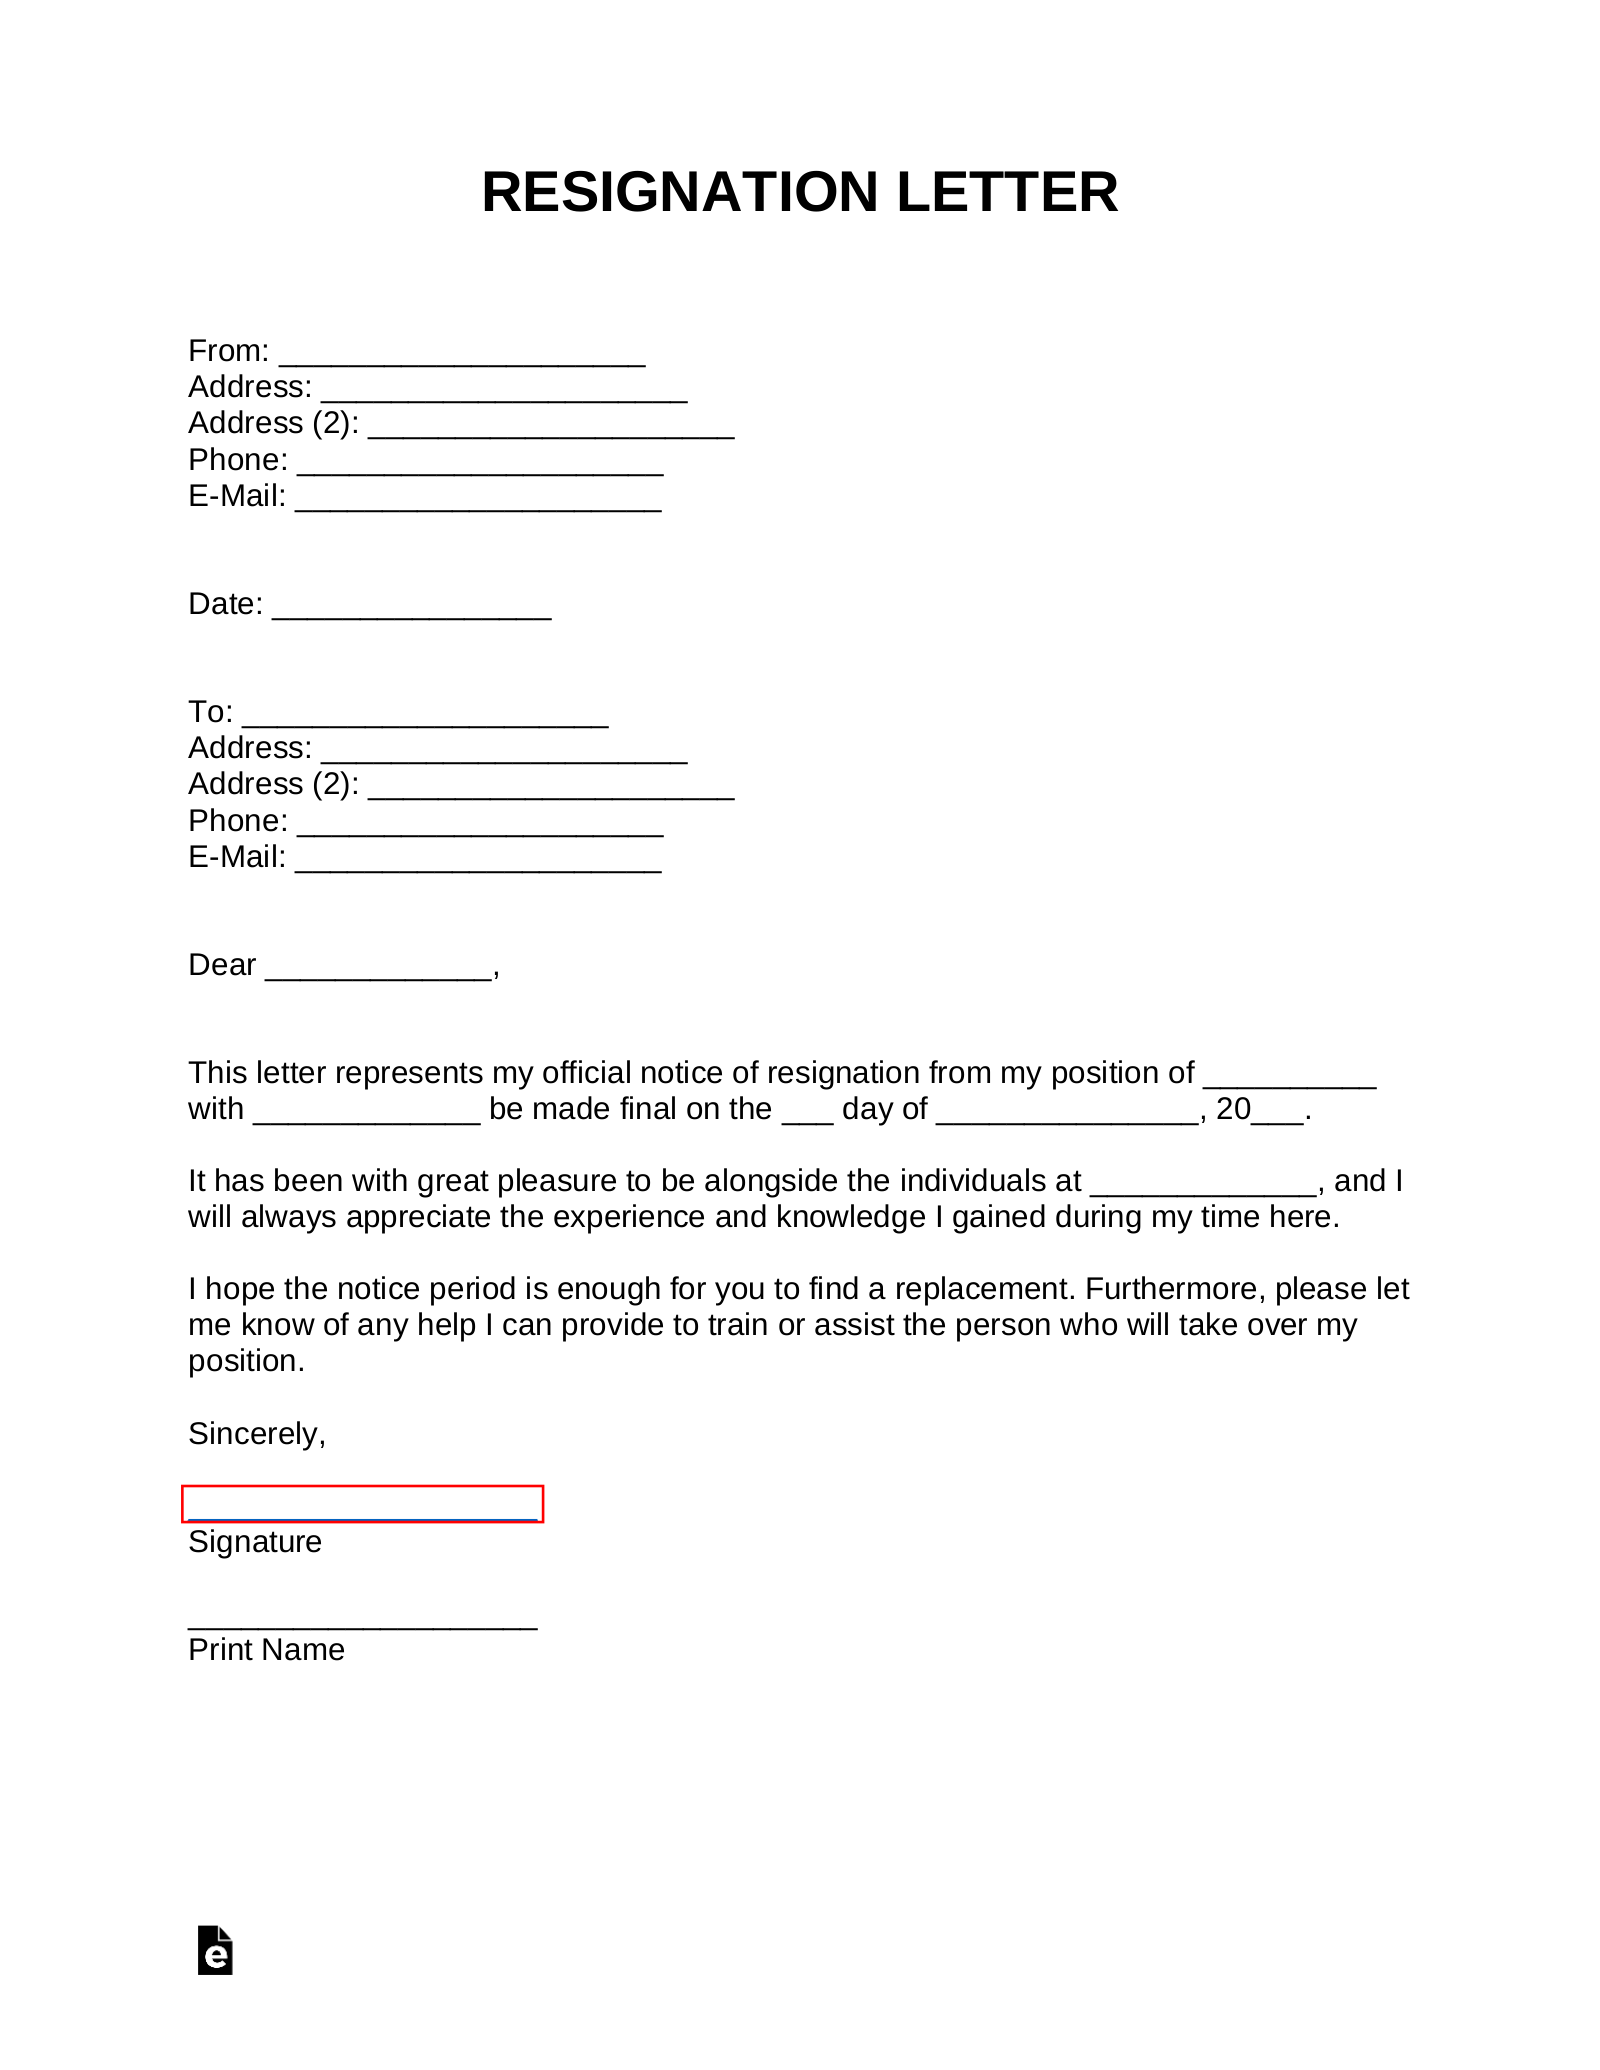 Free Resignation Letters Templates 12 PDF Word EForms